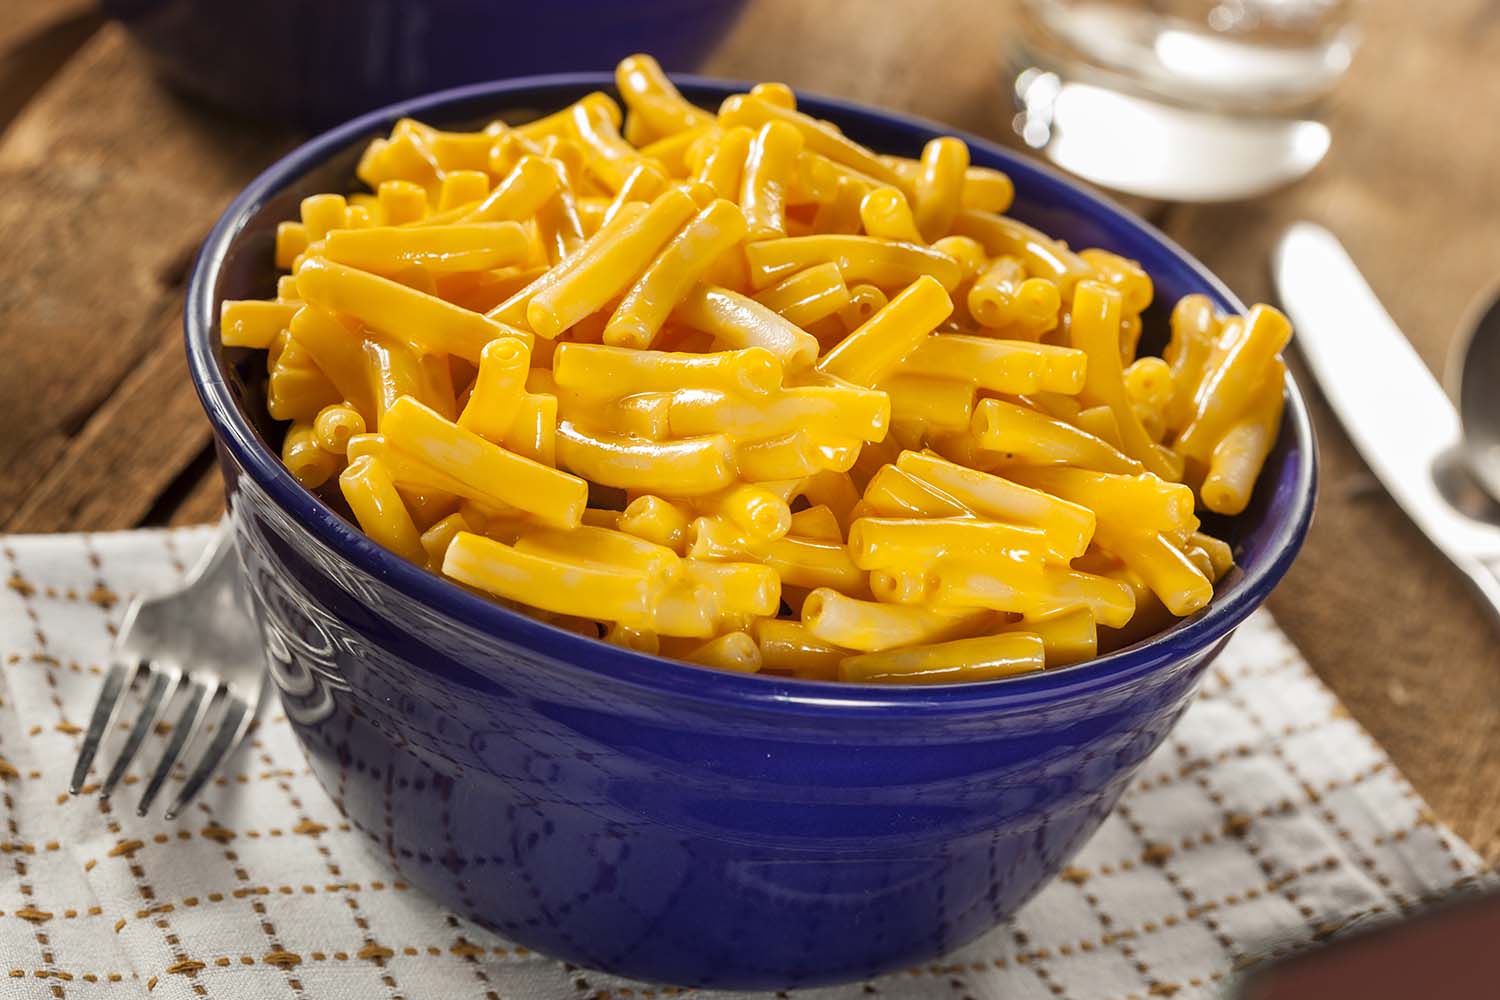 Mac-n-cheese probably isn’t more toxic than other foods